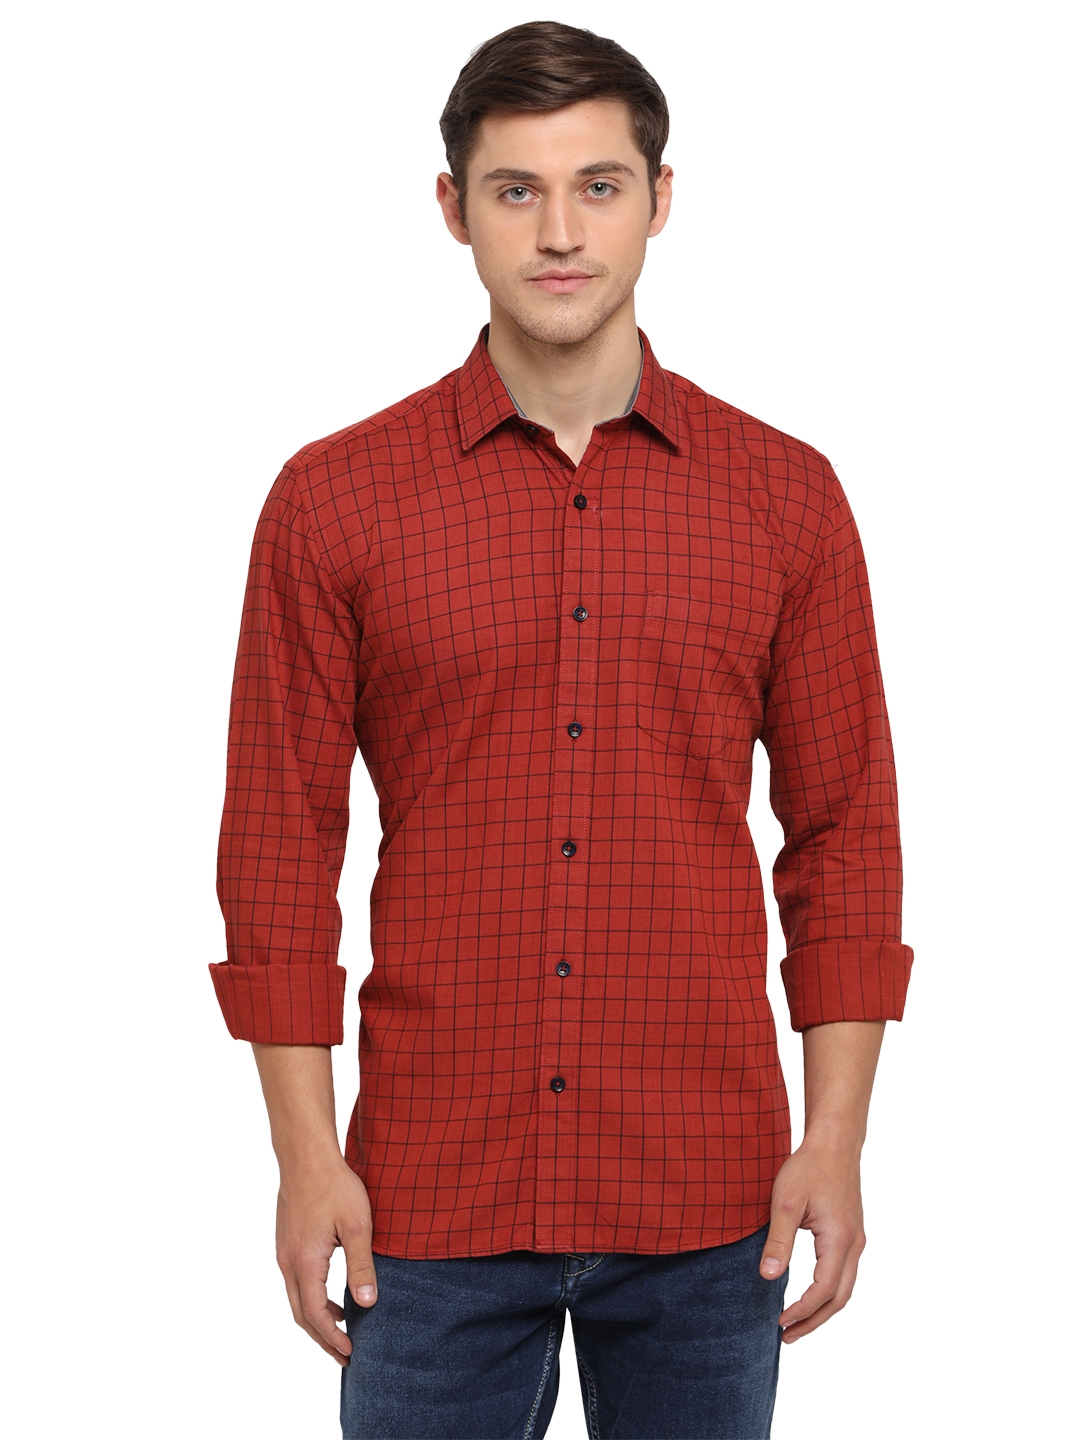 Greenfibre | Red Checked Smart Fit Semi Casual Shirt | Greenfibre 0